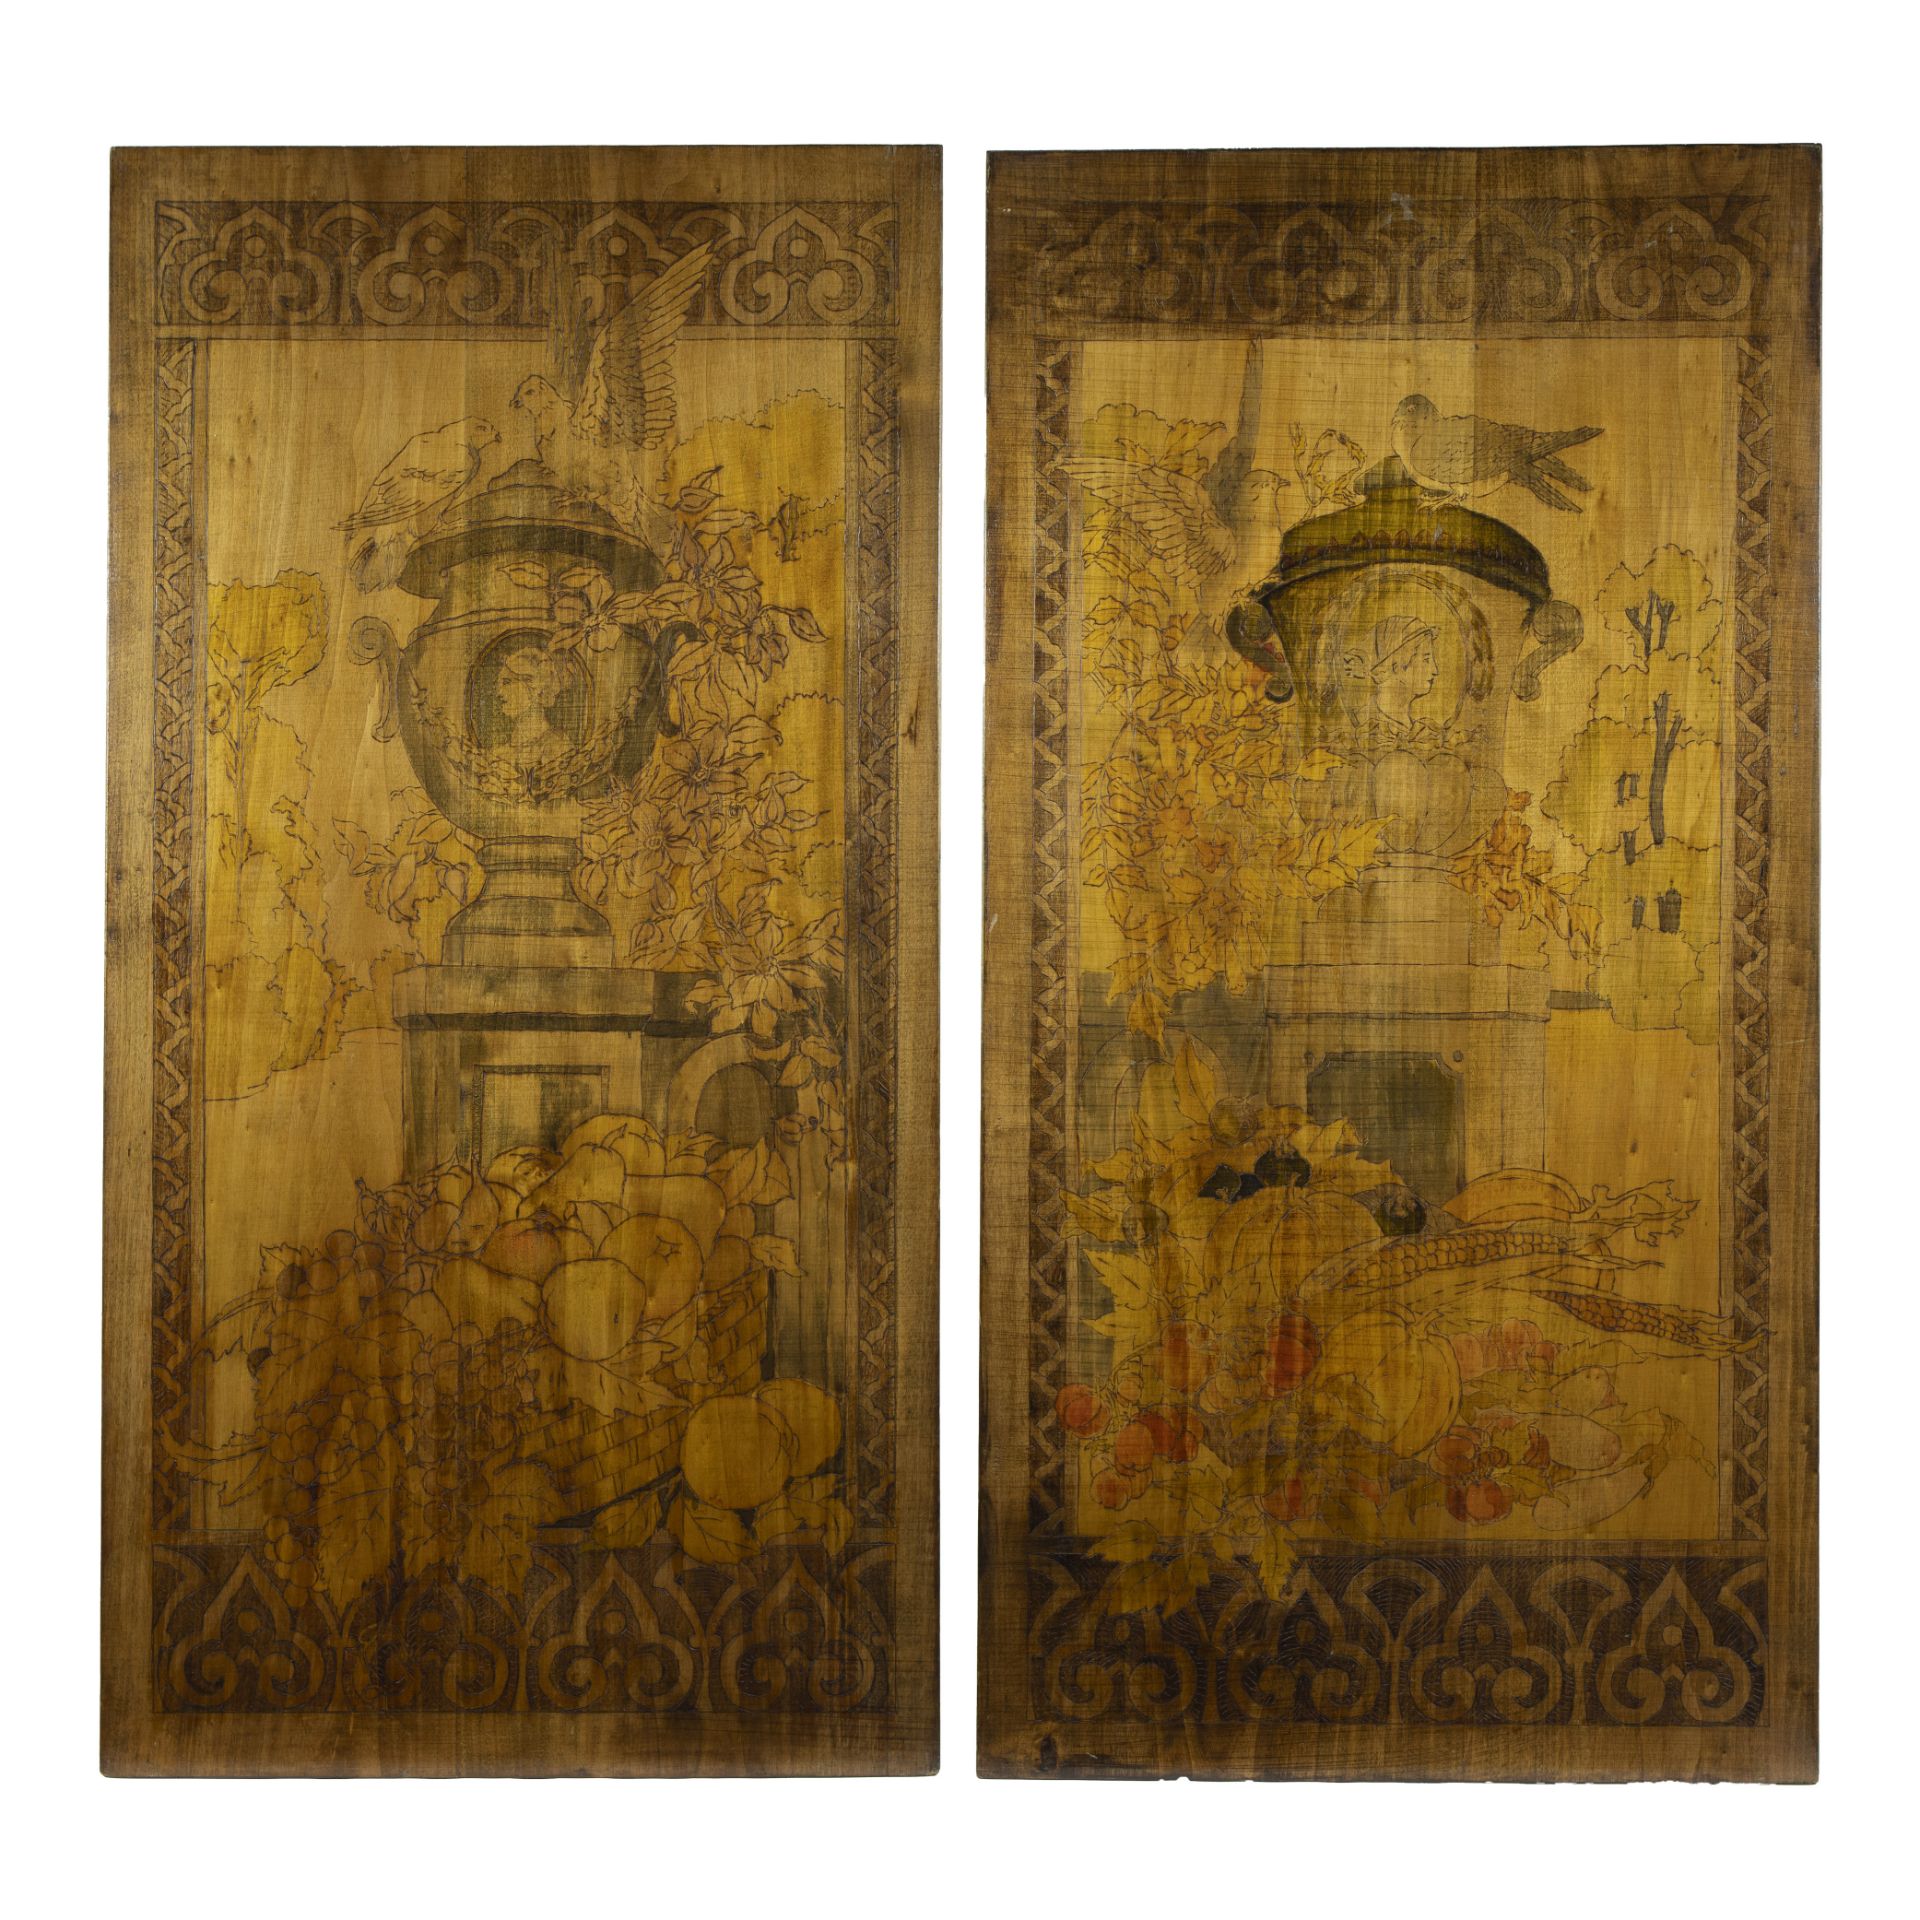 Pair of decorative wooden panels with decor of imposing garden vases and birds